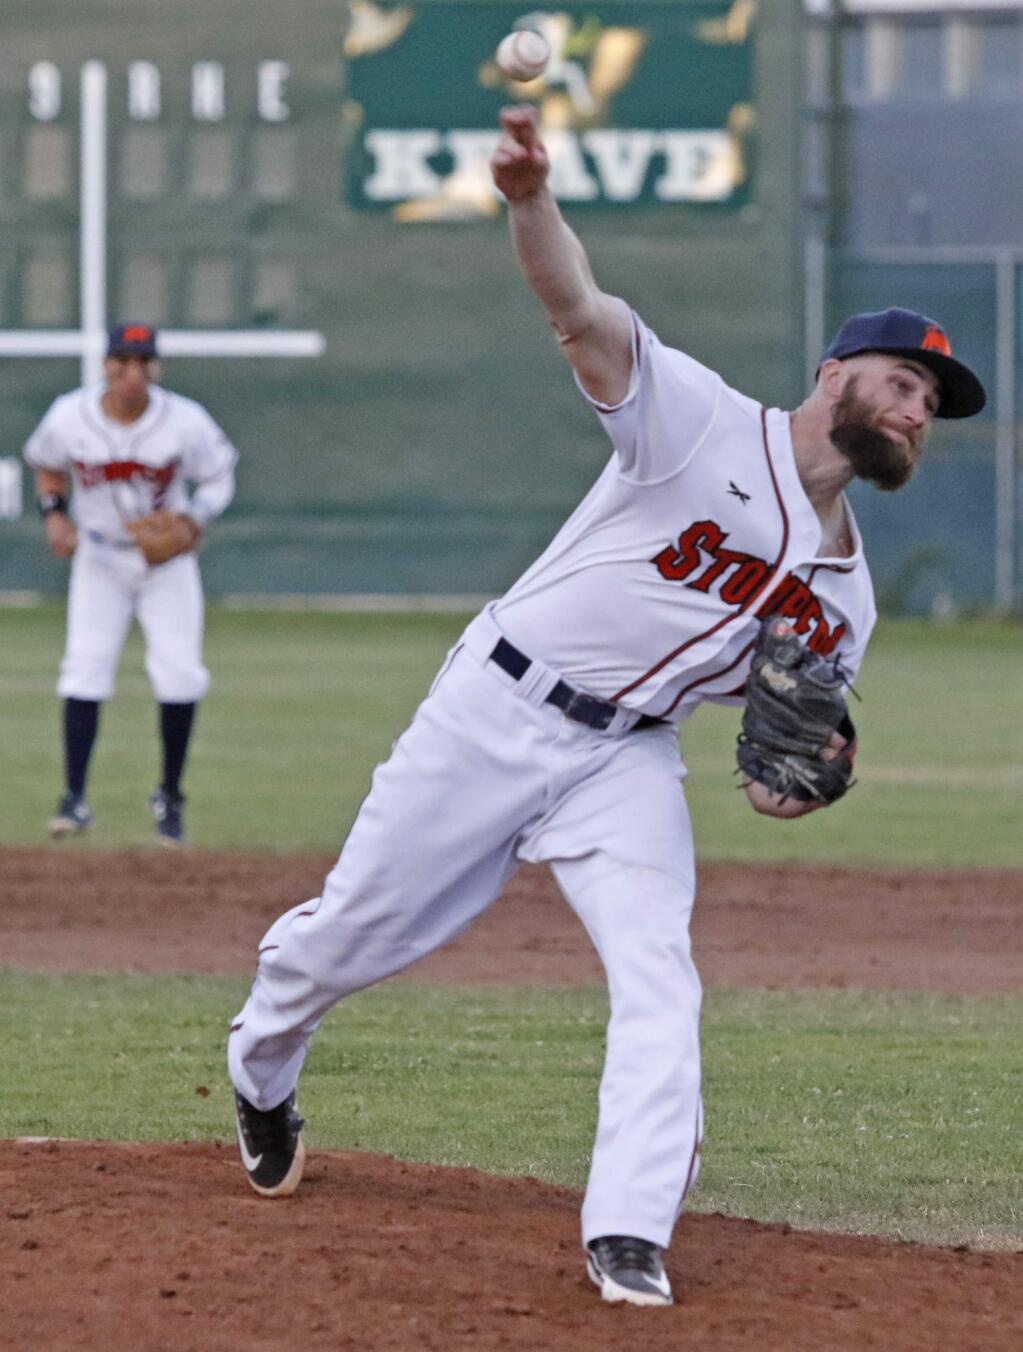 Billl Hoban/Index-TribuneSonoma Stomper starter Ethan Gibbons pitched seven strong innings Friday giving up only two runs in the Stompers 5-2 win over the Pittsburg Diamonds. The Stompers will be at home Wednesday, Thursday and Friday this week.